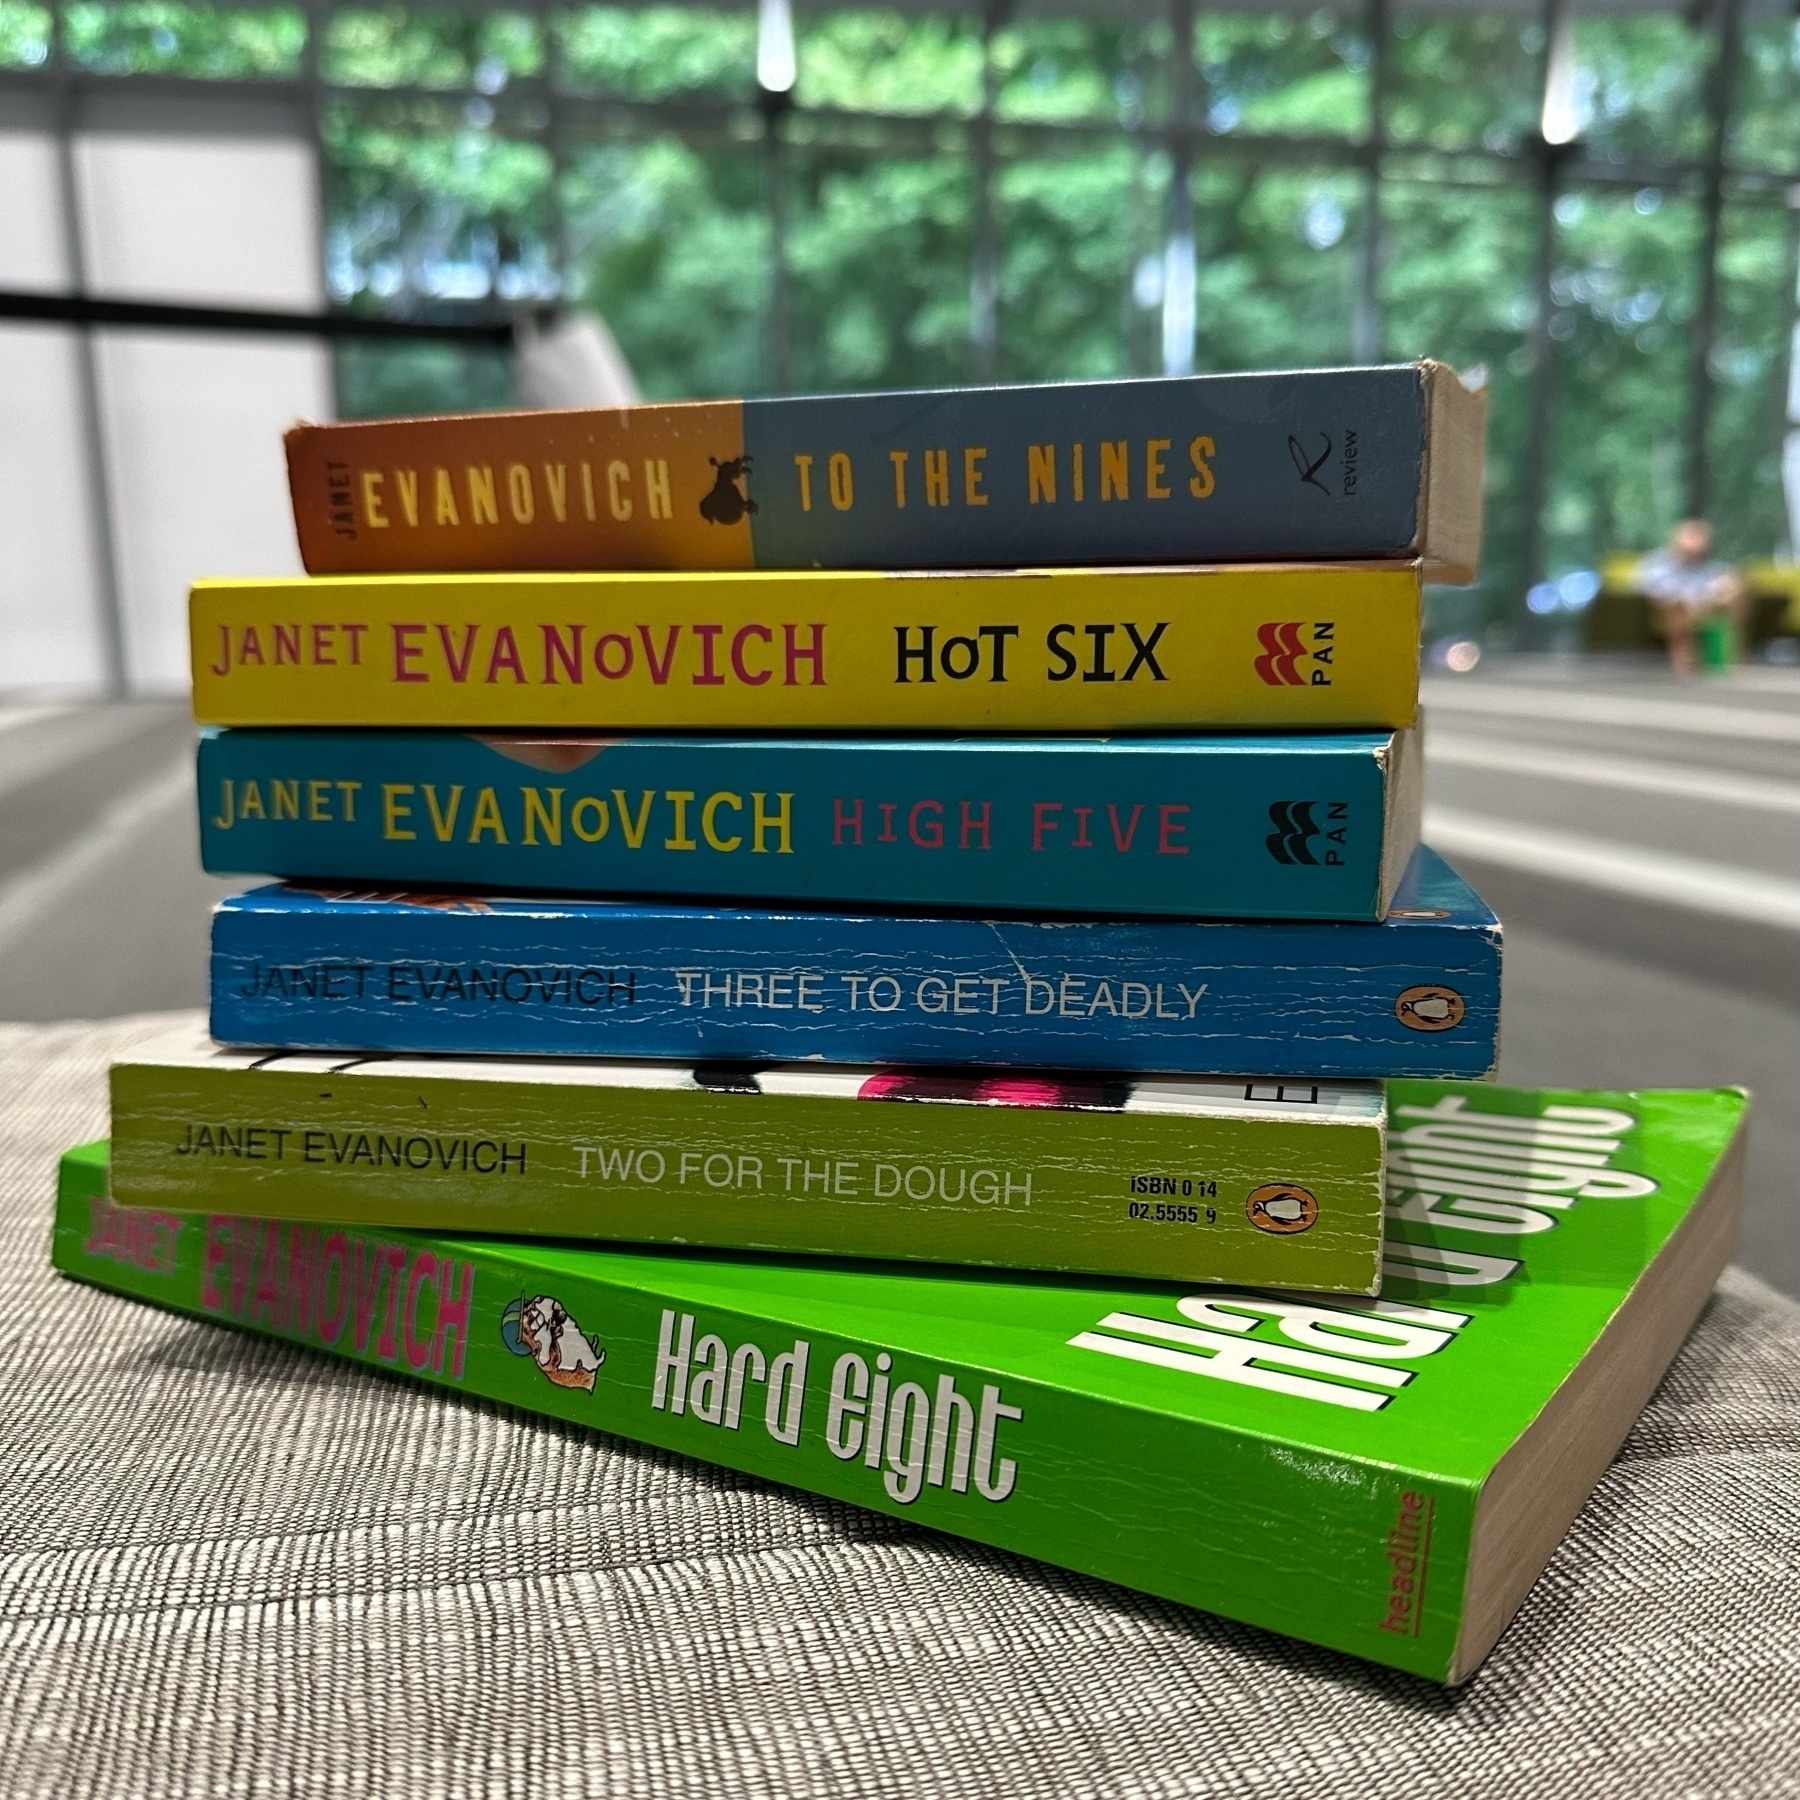 Six books by Janet Evanovich stacked in a pile.